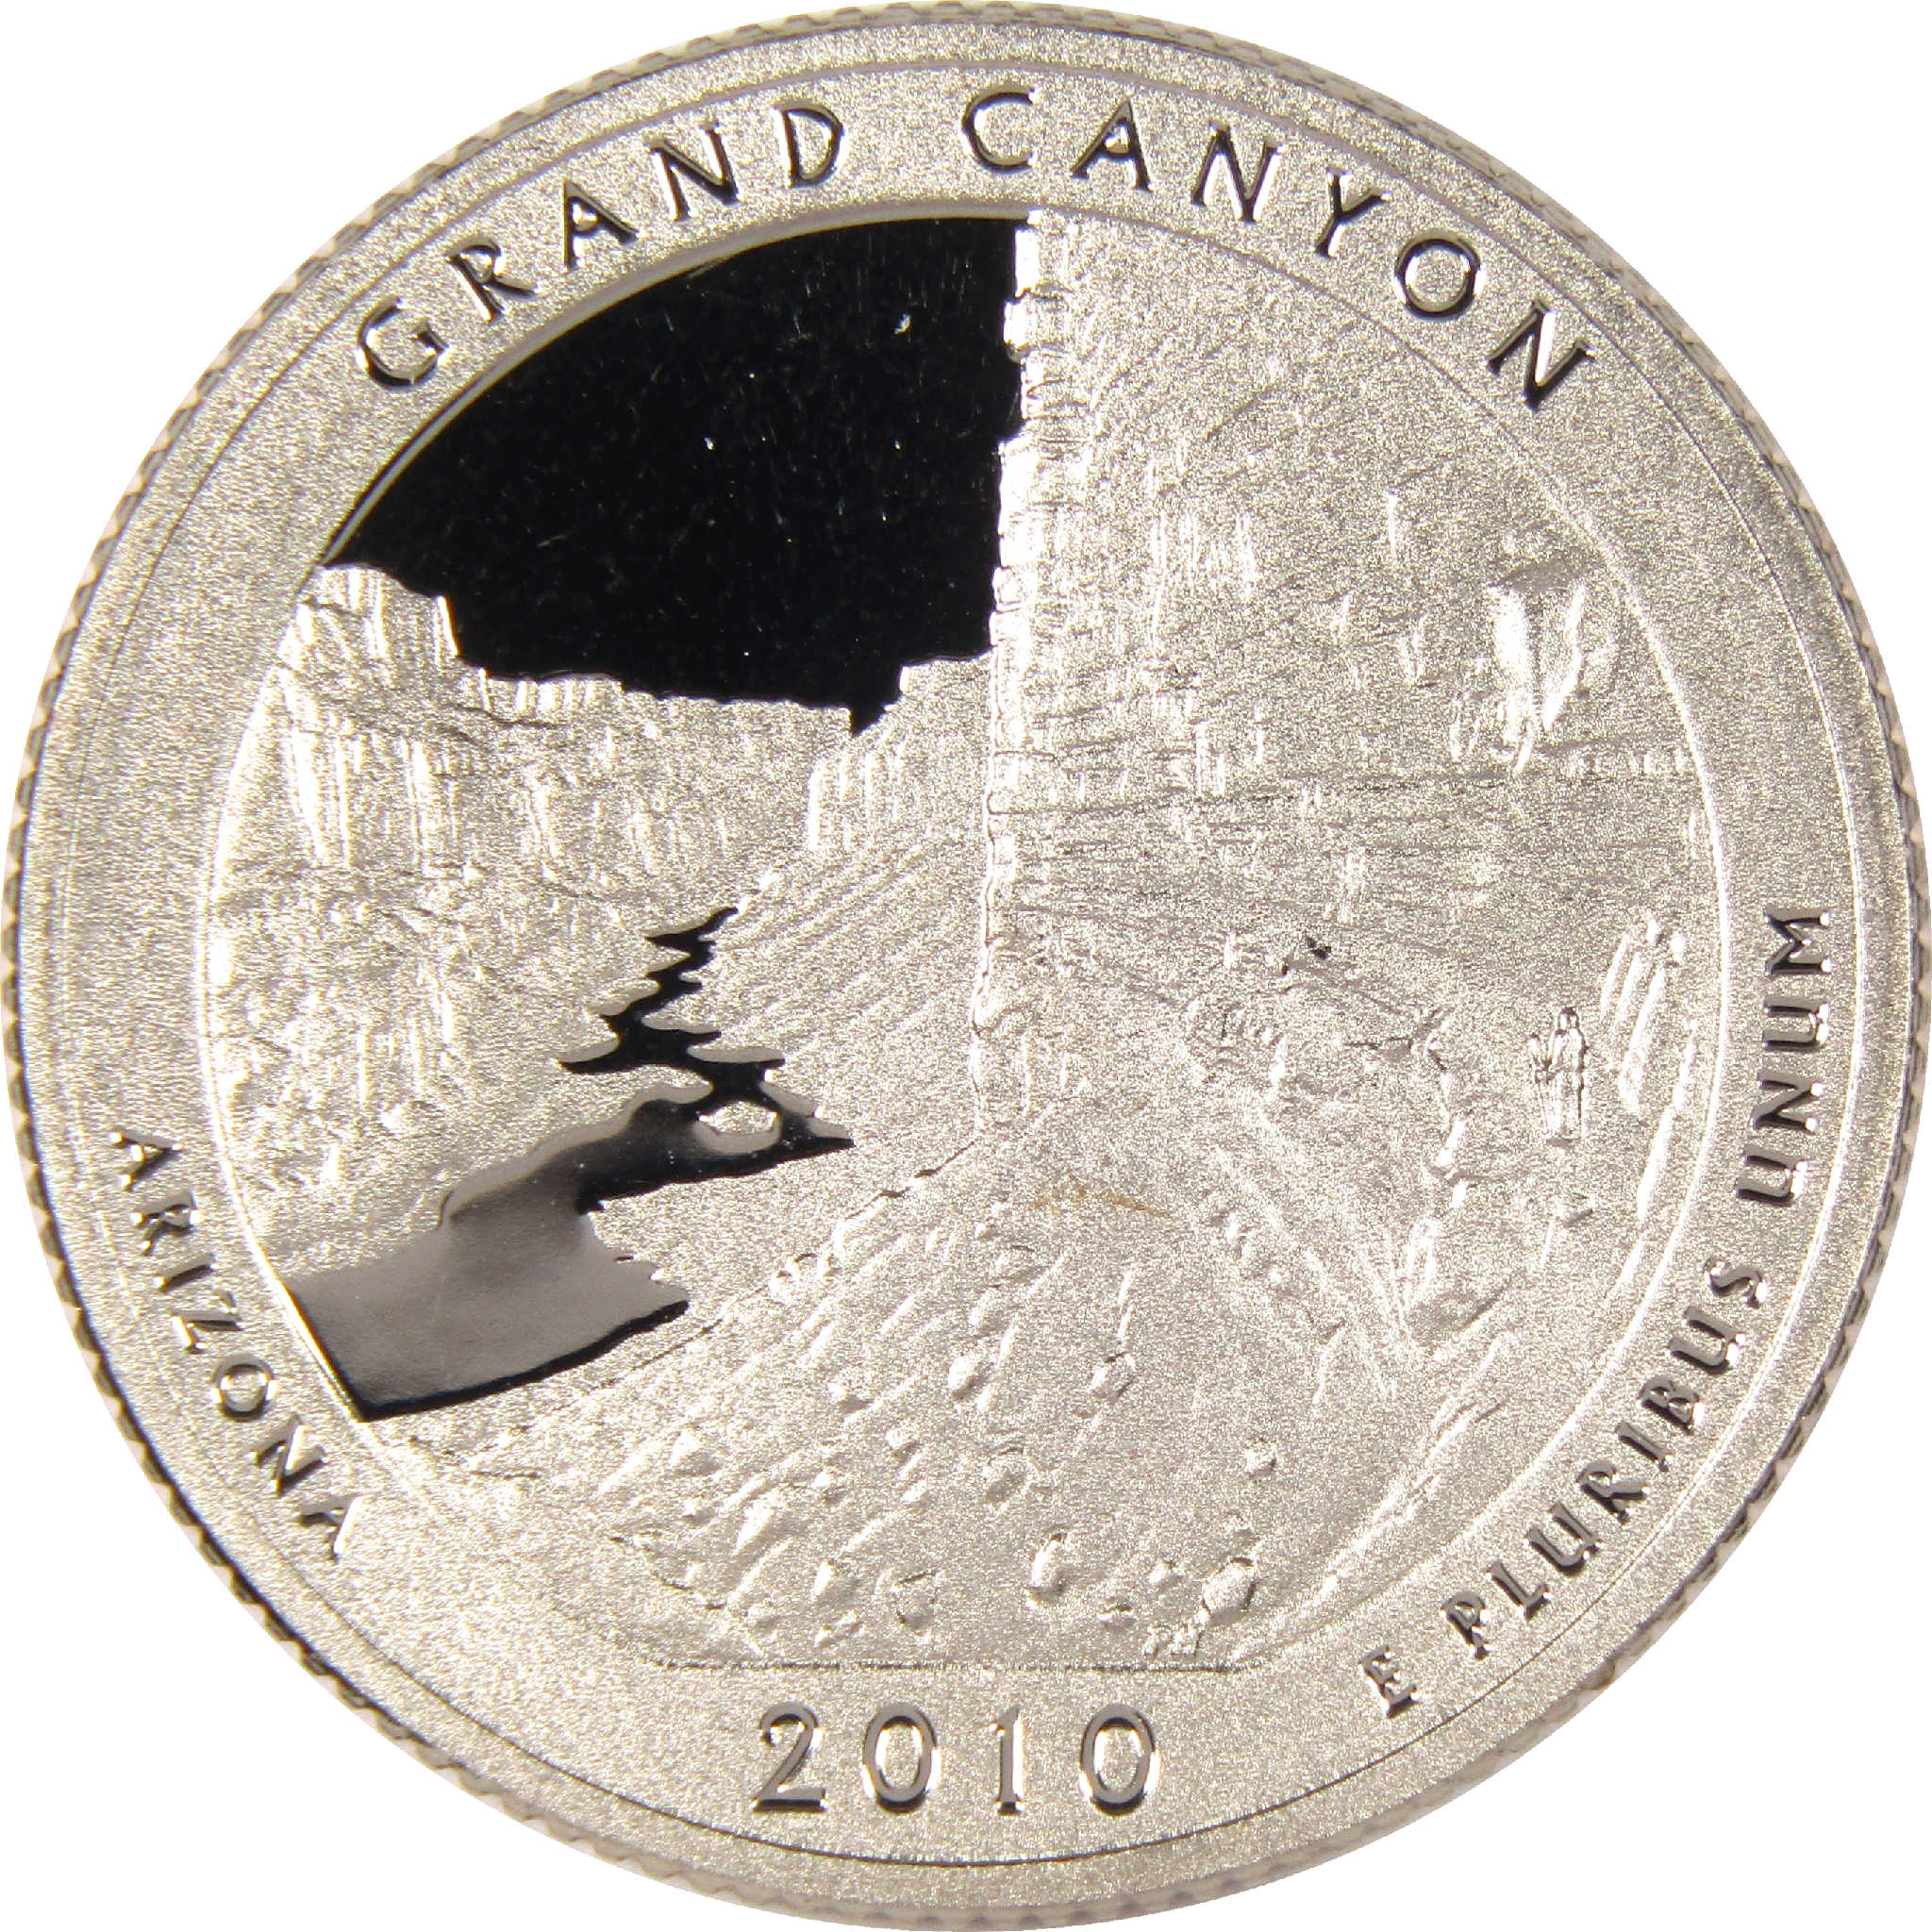 2010 S Grand Canyon National Park Quarter Clad 25c Proof Coin